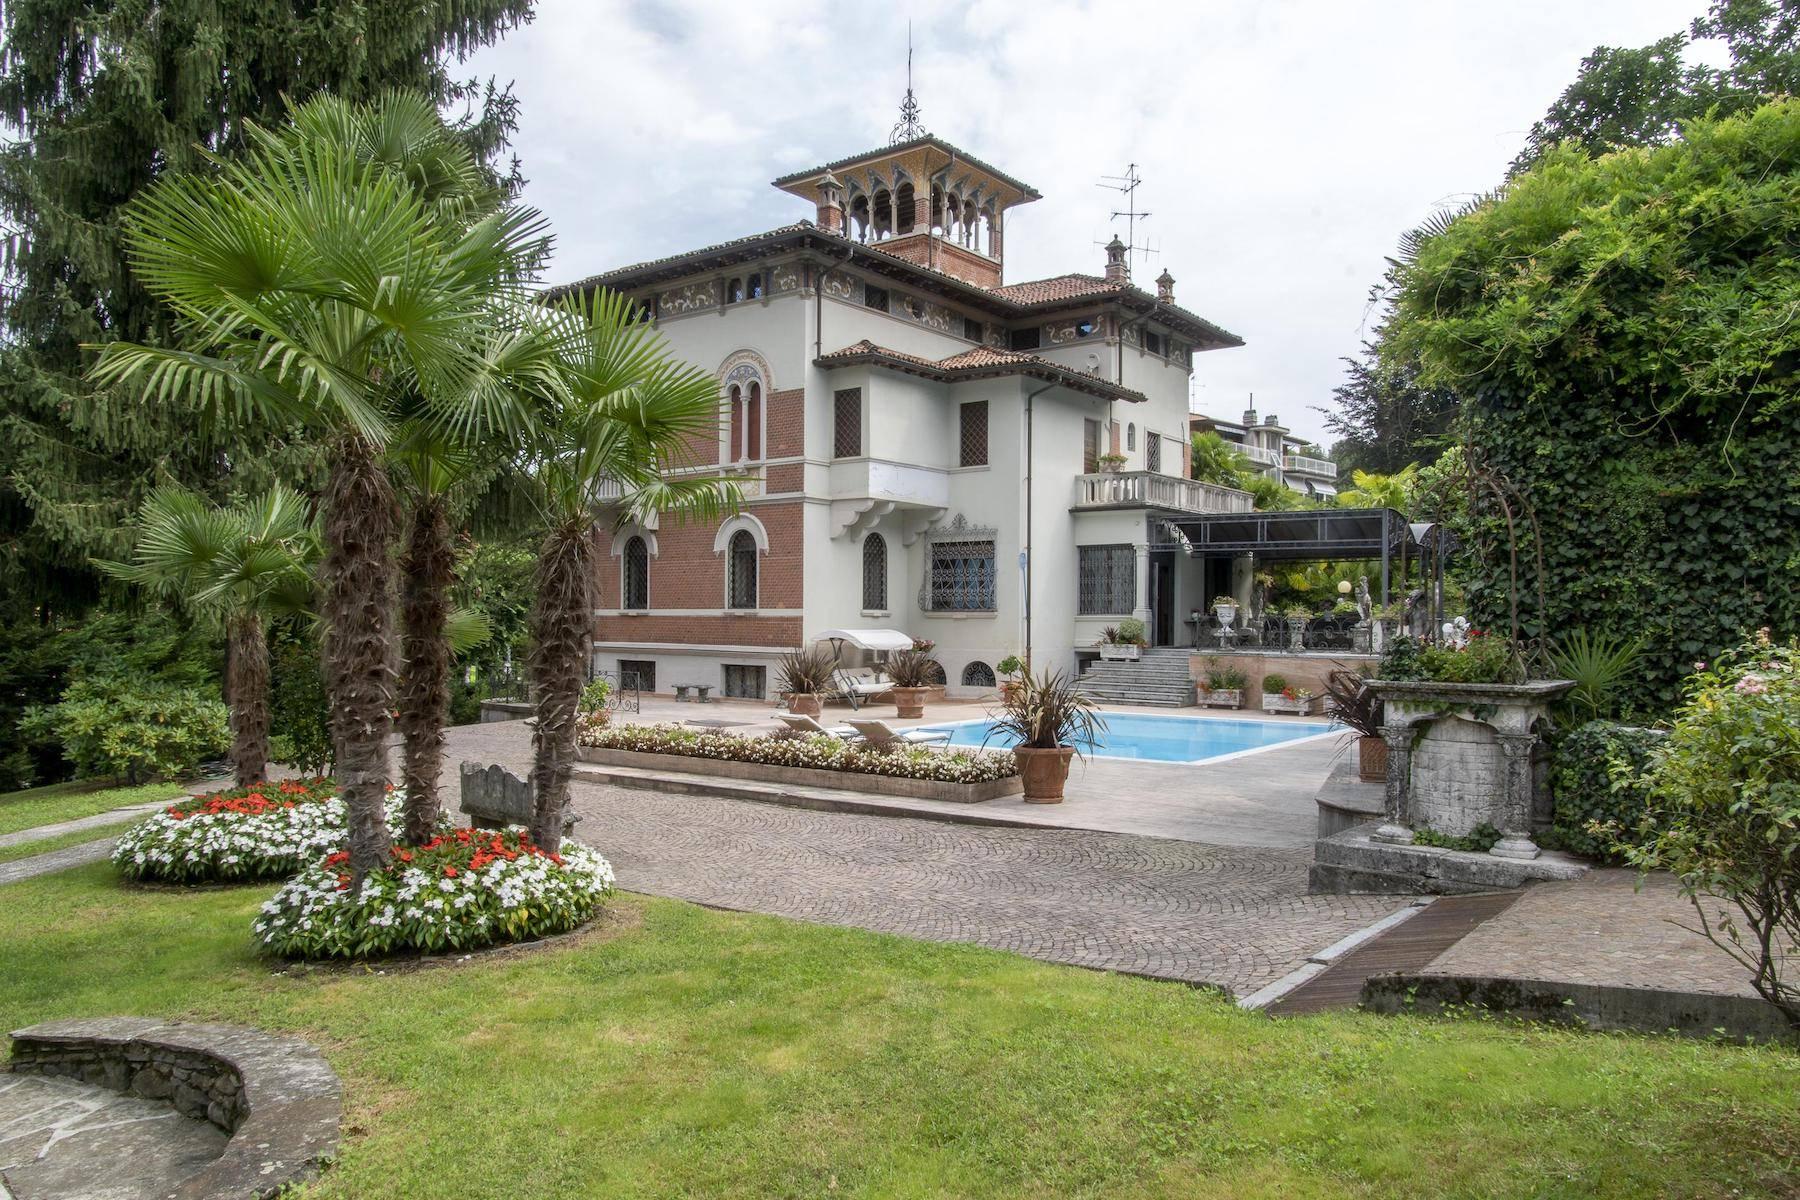 Majestic period villa with swimming pool and tower in the heart of Stresa - 10